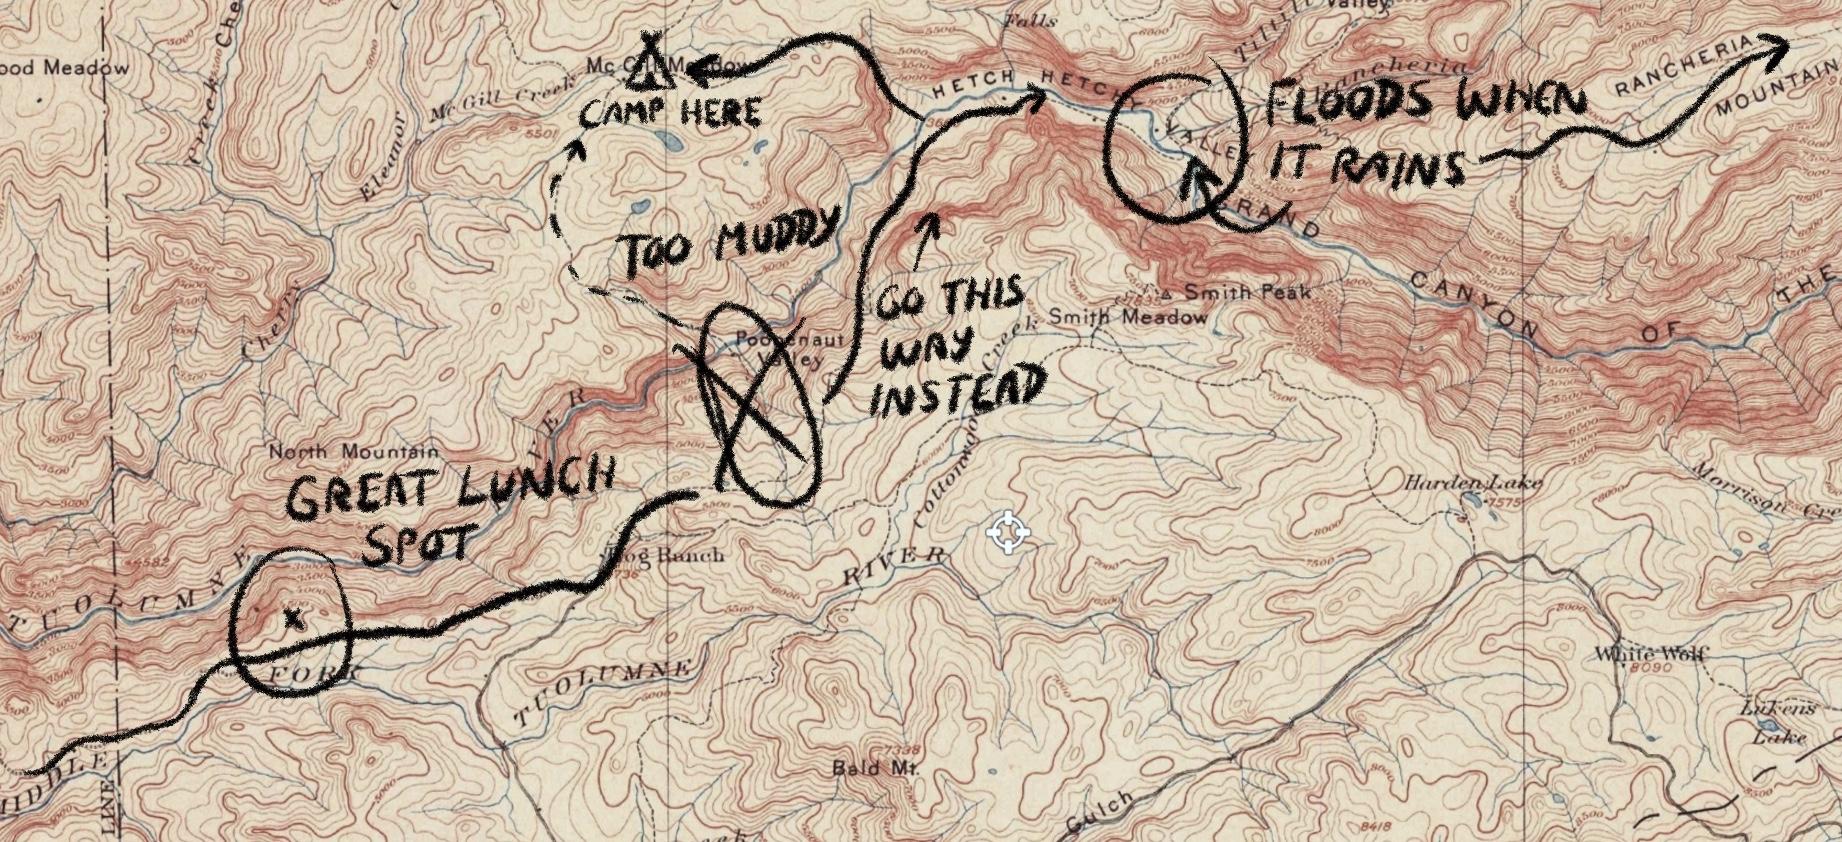 Hiking map with hand-drawn annotations